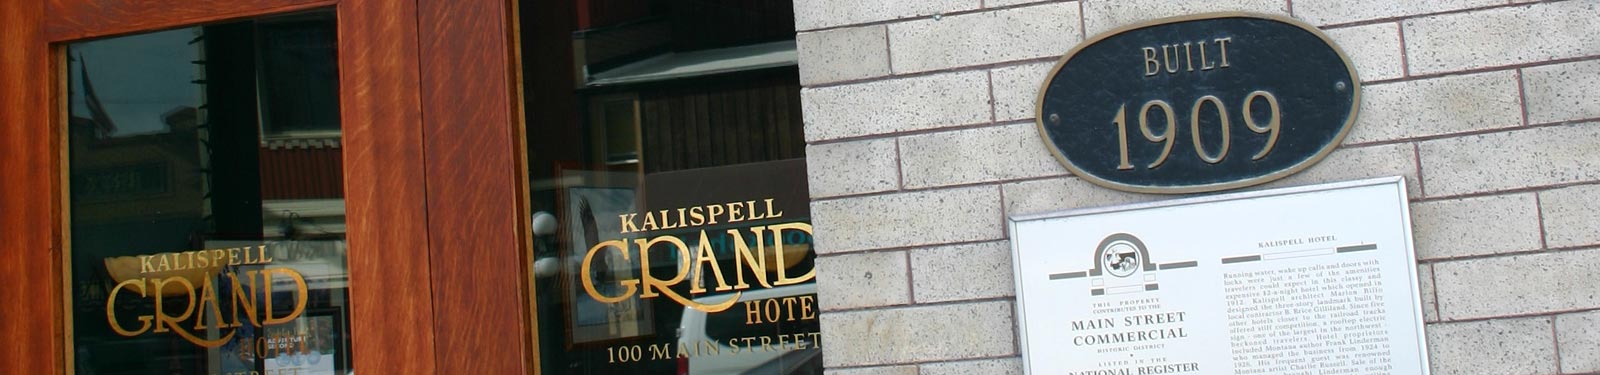 Kalispell Grand Hotel - Reservations - Prices - Book Hotel Room